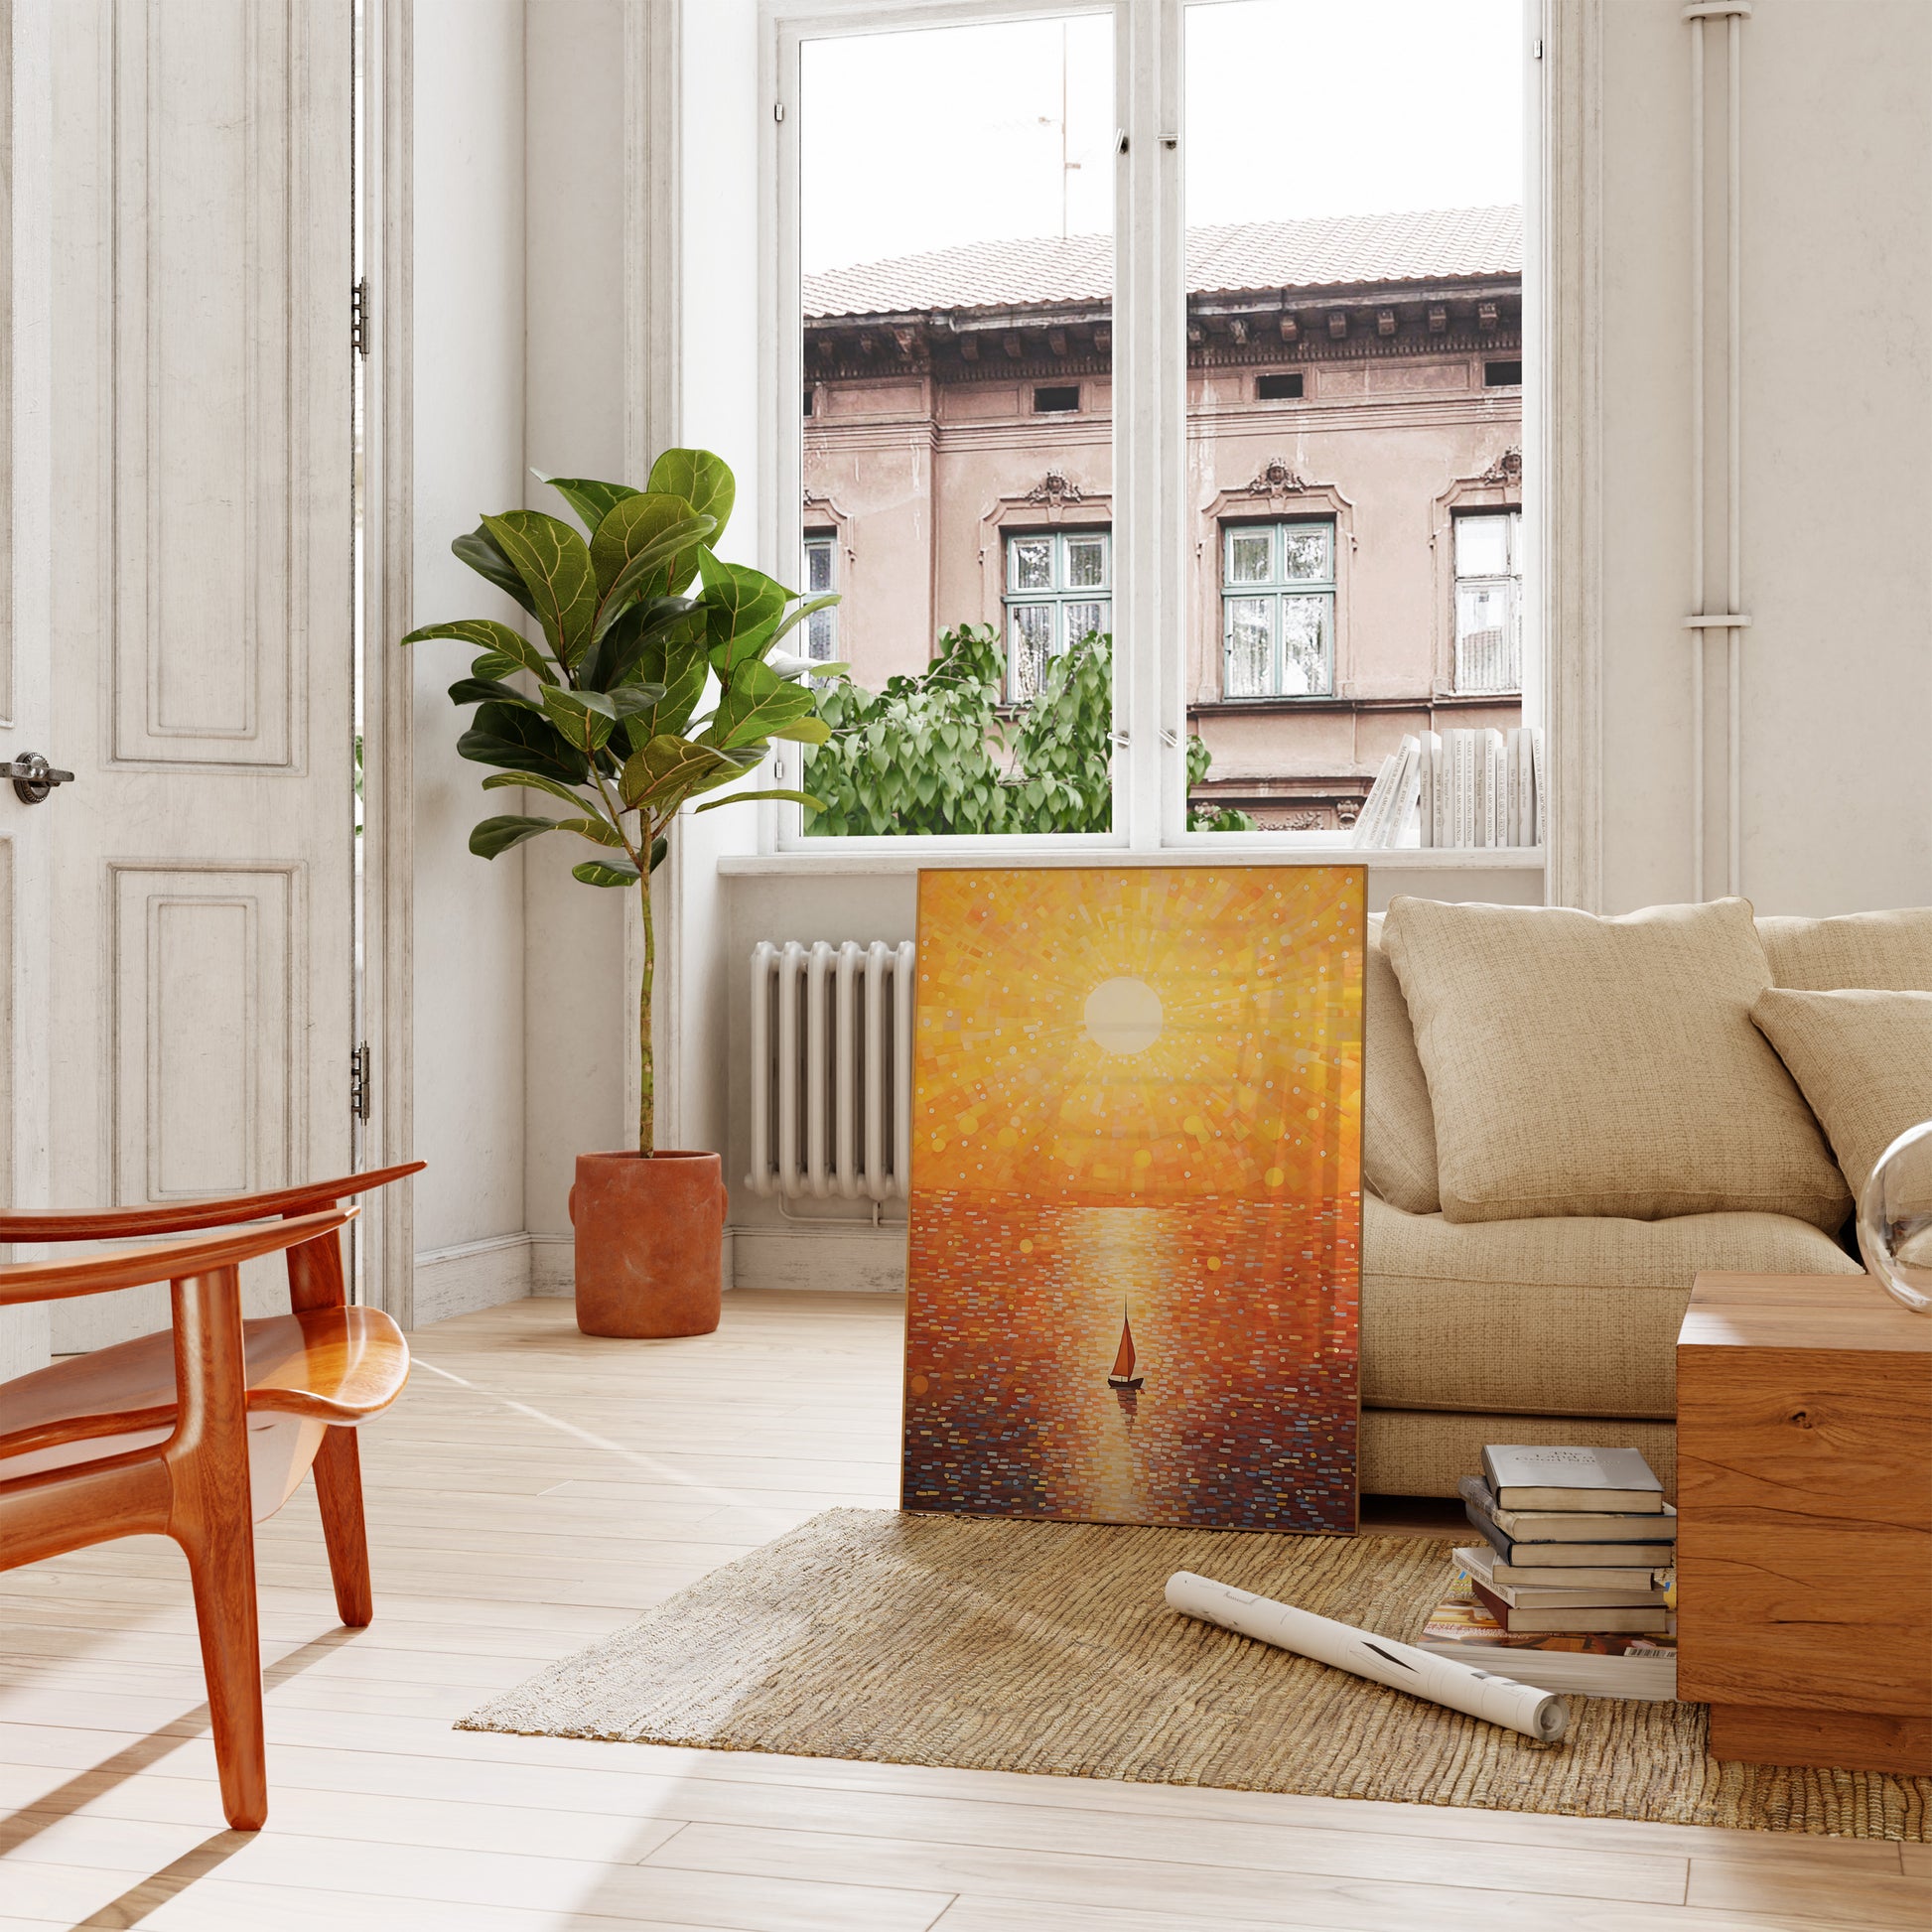 A serene painting leaning against a wall in a sunlit, cozy living room.